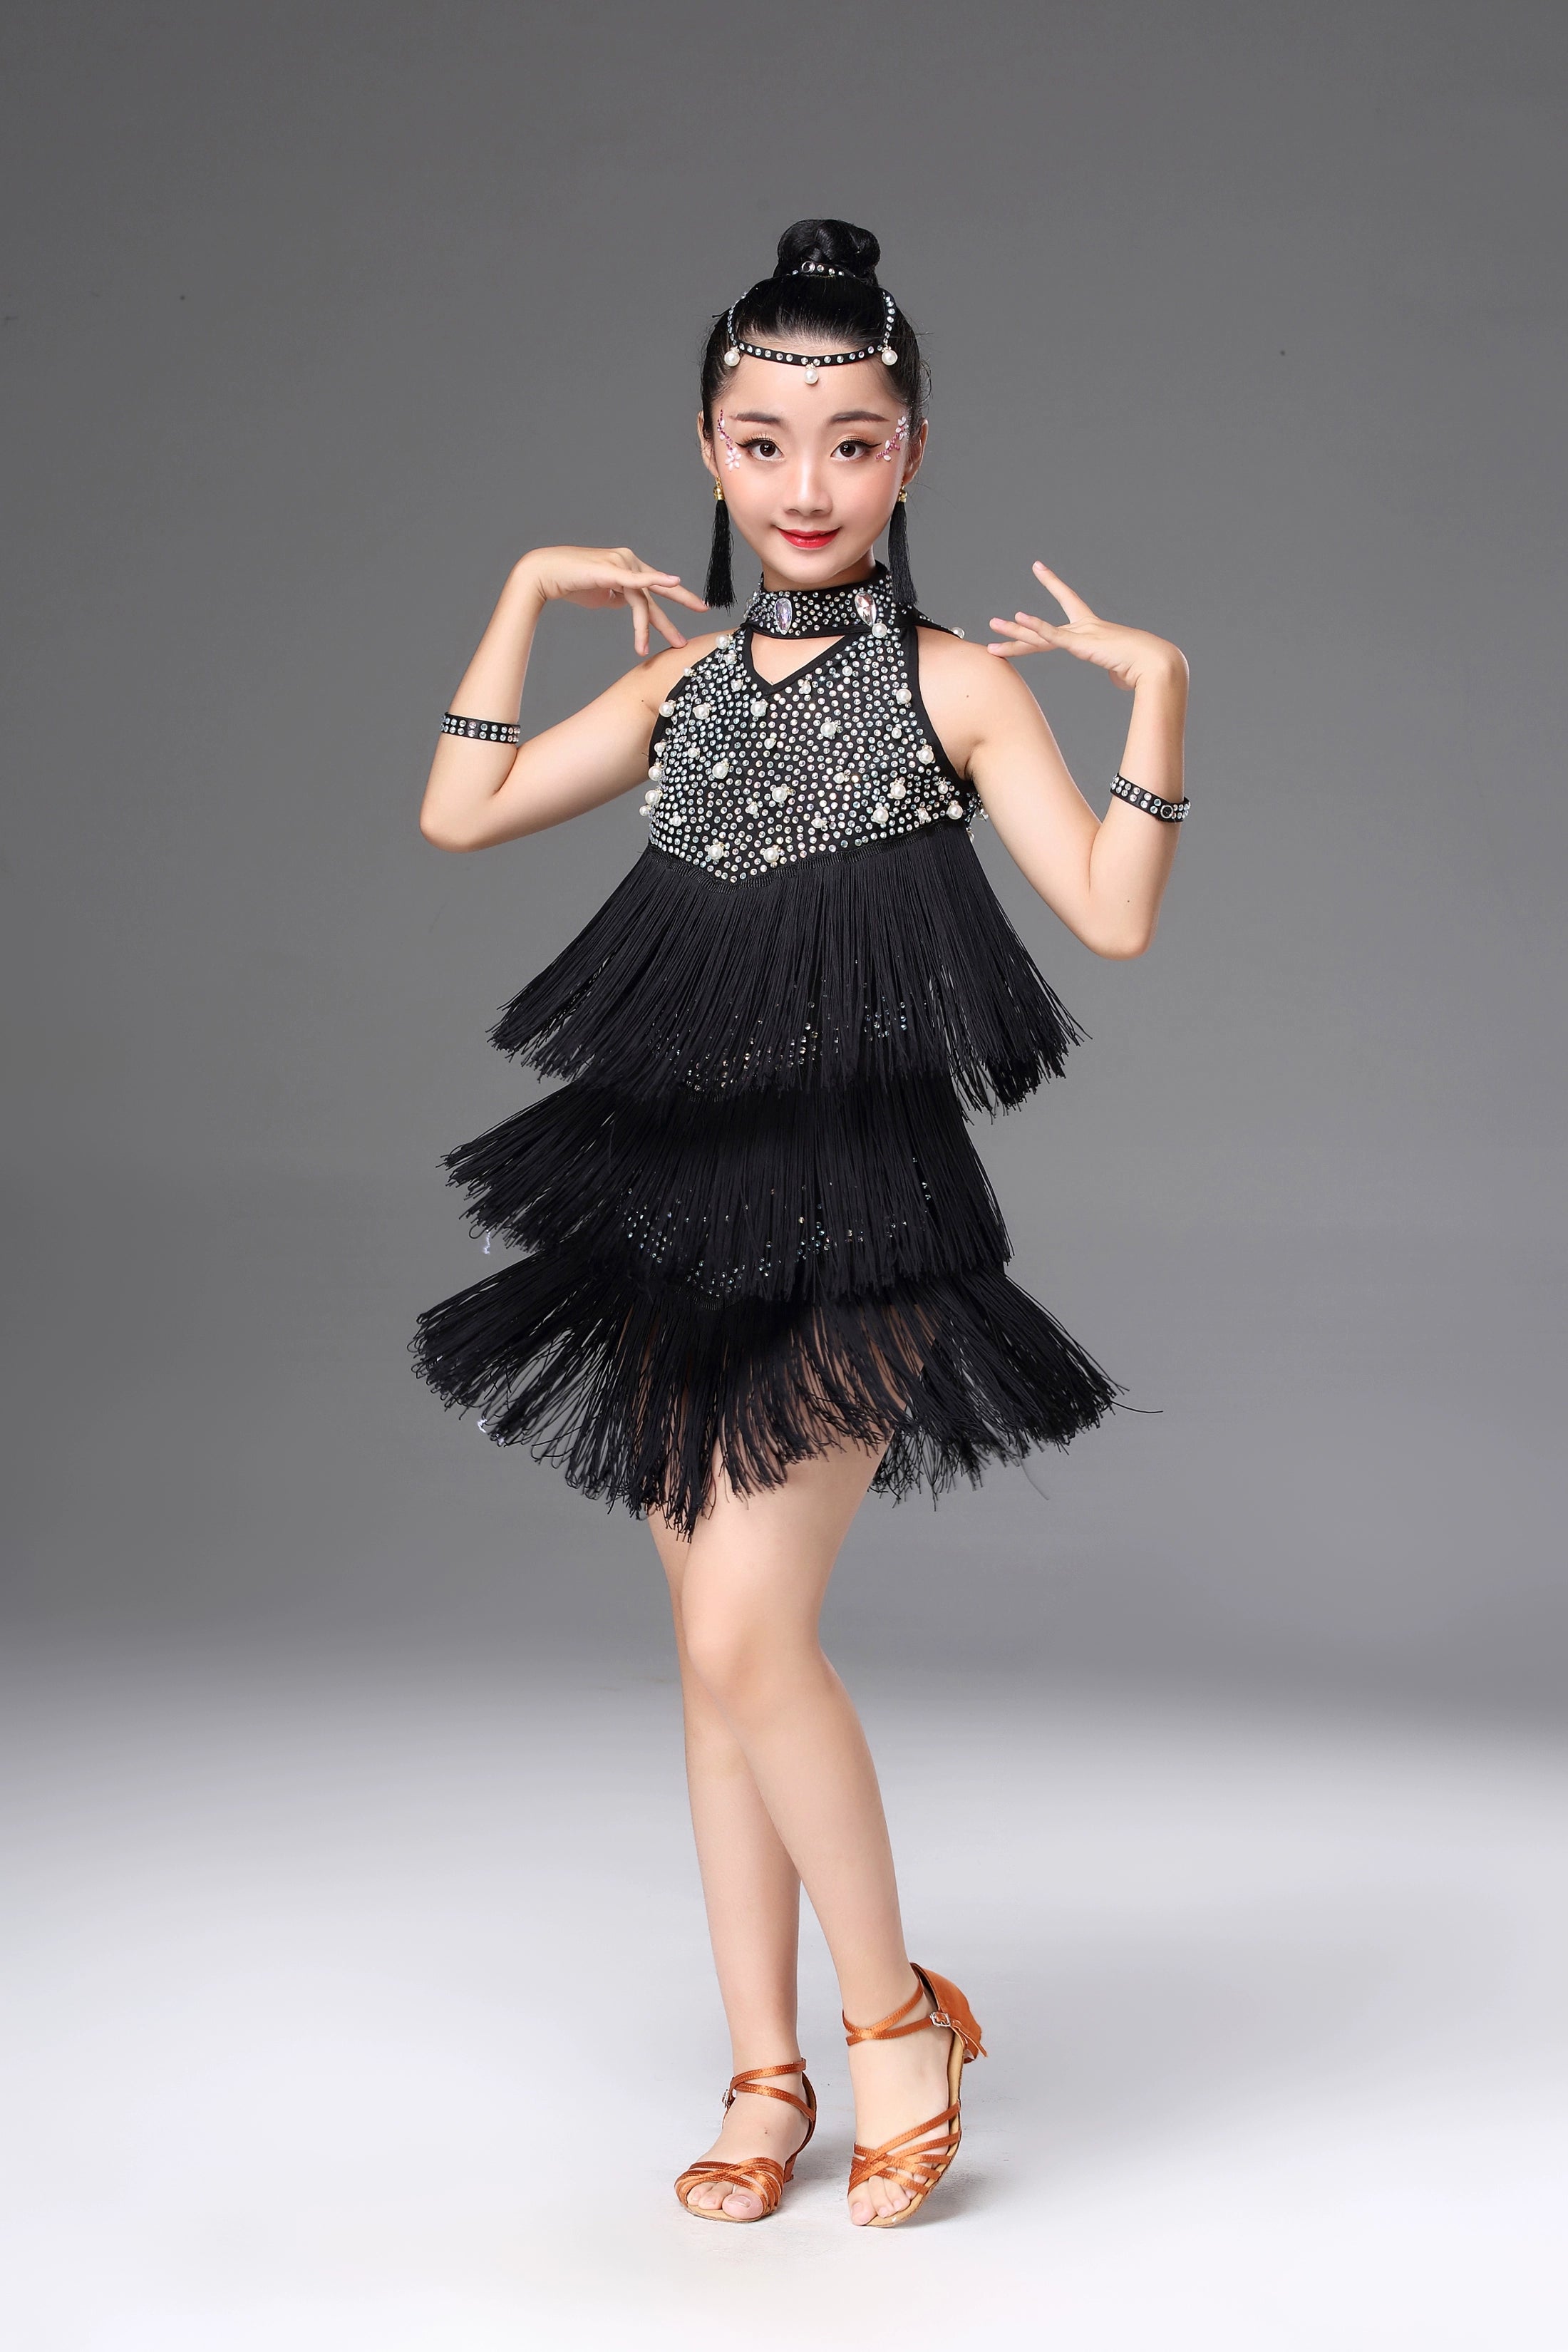 Girls Latin Dance Dresses Children's Professional Latin dance performance clothes girls' bright diamond fringe Latin dance skirt children's Latin competition clothing